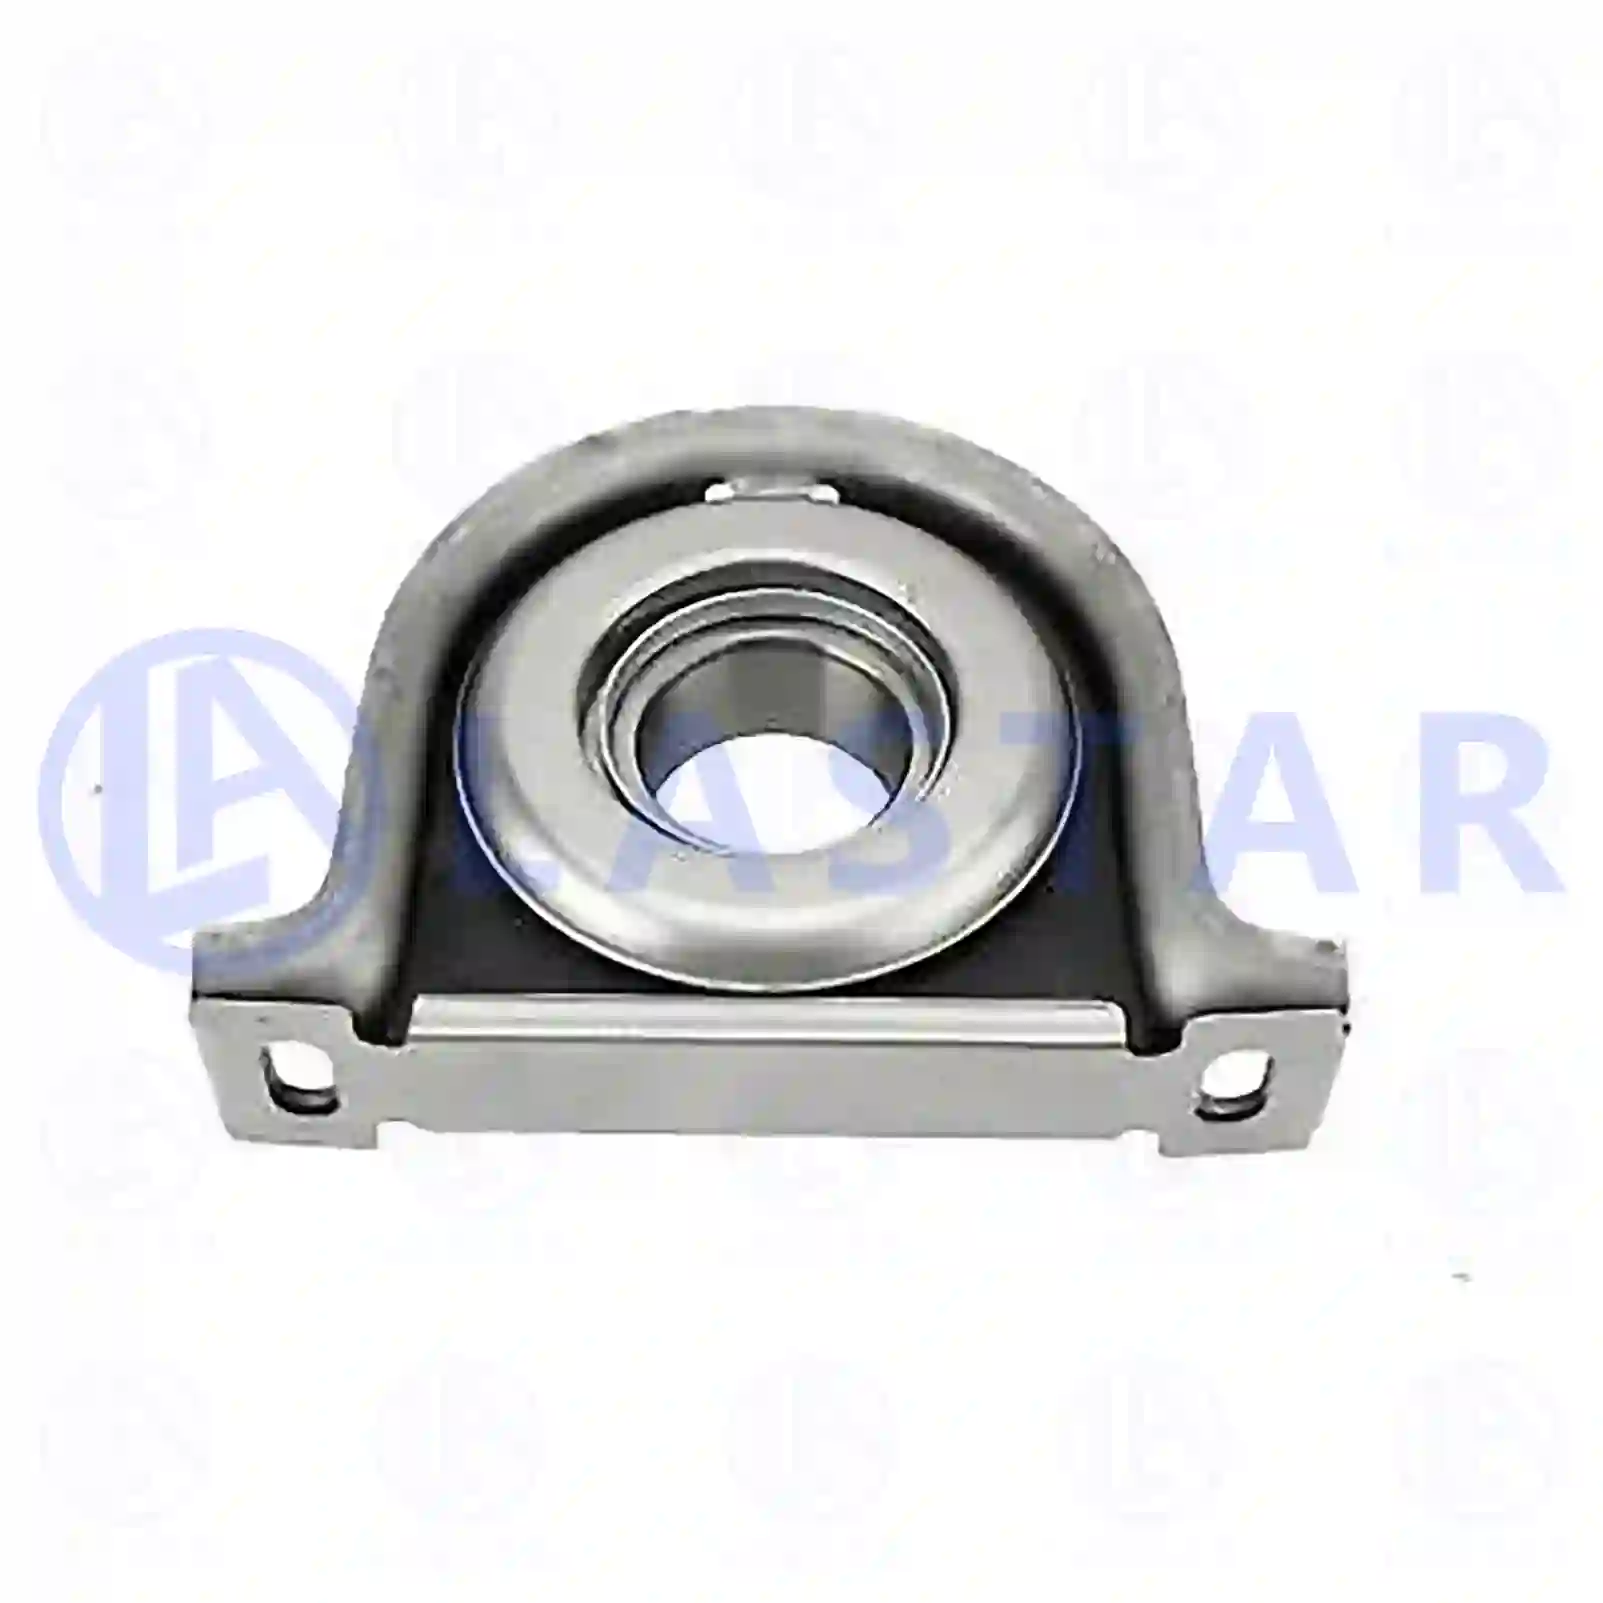 Center bearing, 77734325, 5000816925 ||  77734325 Lastar Spare Part | Truck Spare Parts, Auotomotive Spare Parts Center bearing, 77734325, 5000816925 ||  77734325 Lastar Spare Part | Truck Spare Parts, Auotomotive Spare Parts